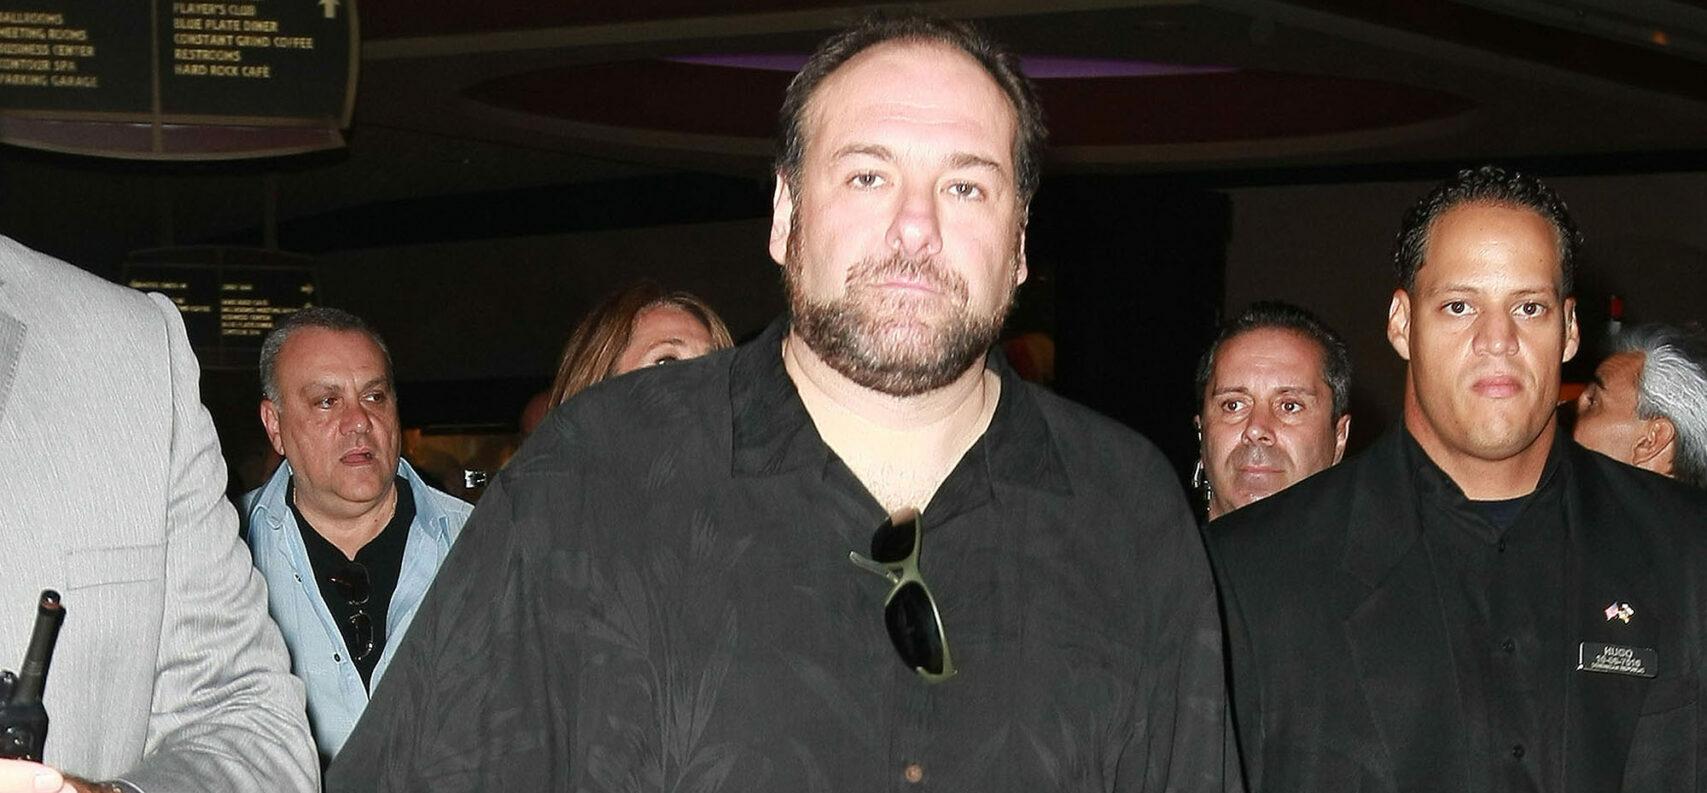 James Gandolfini Was Paid $3 million To Not Replace Steve Carell In ‘The Office’